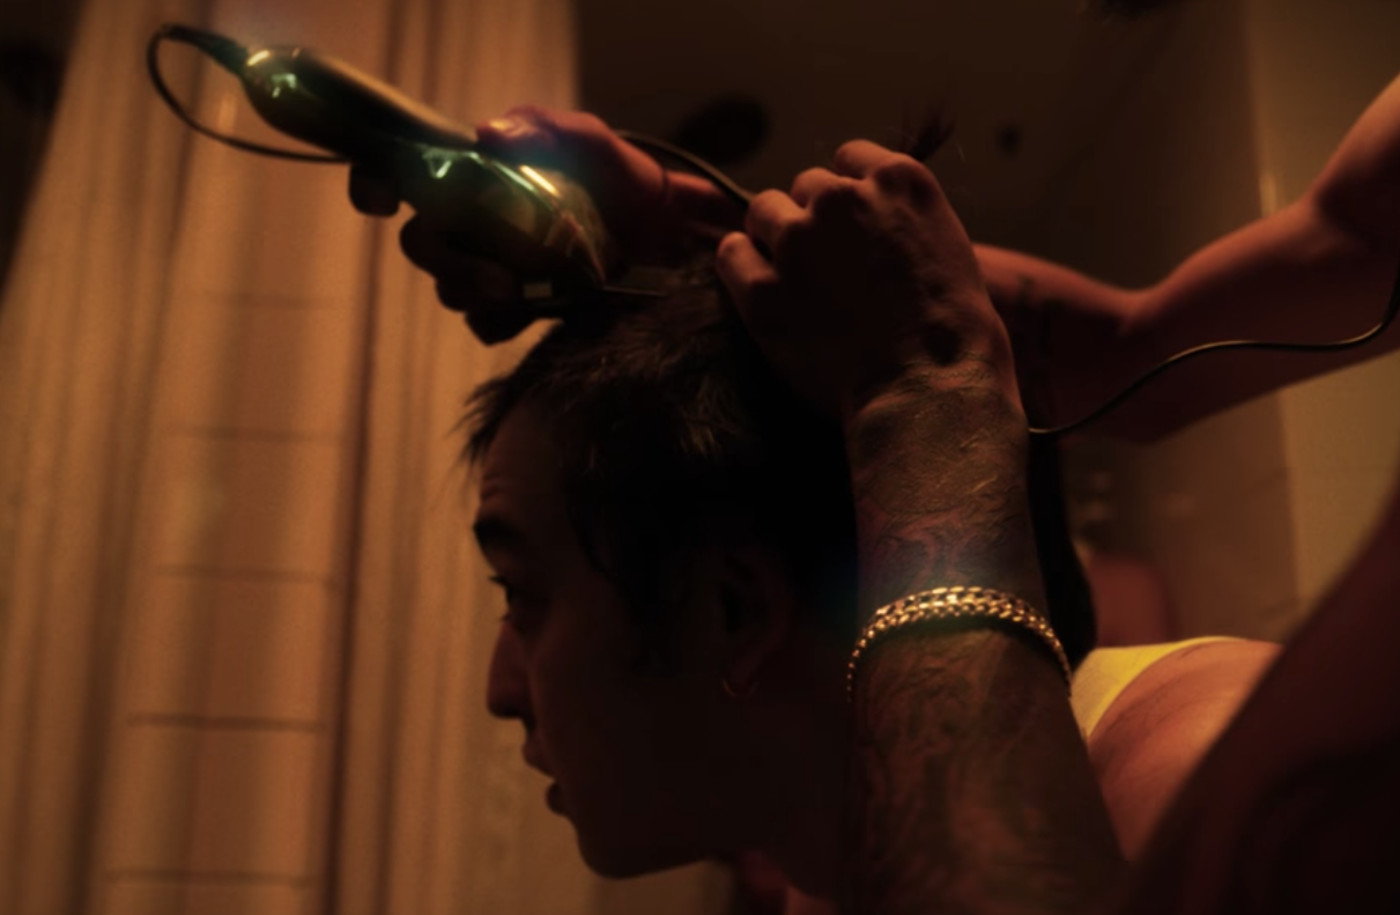 Joji Drops Video For Clams Casino Produced Can T Get Over You Complex joji tackles heartbreak in new video for clams casino produced can t get over you